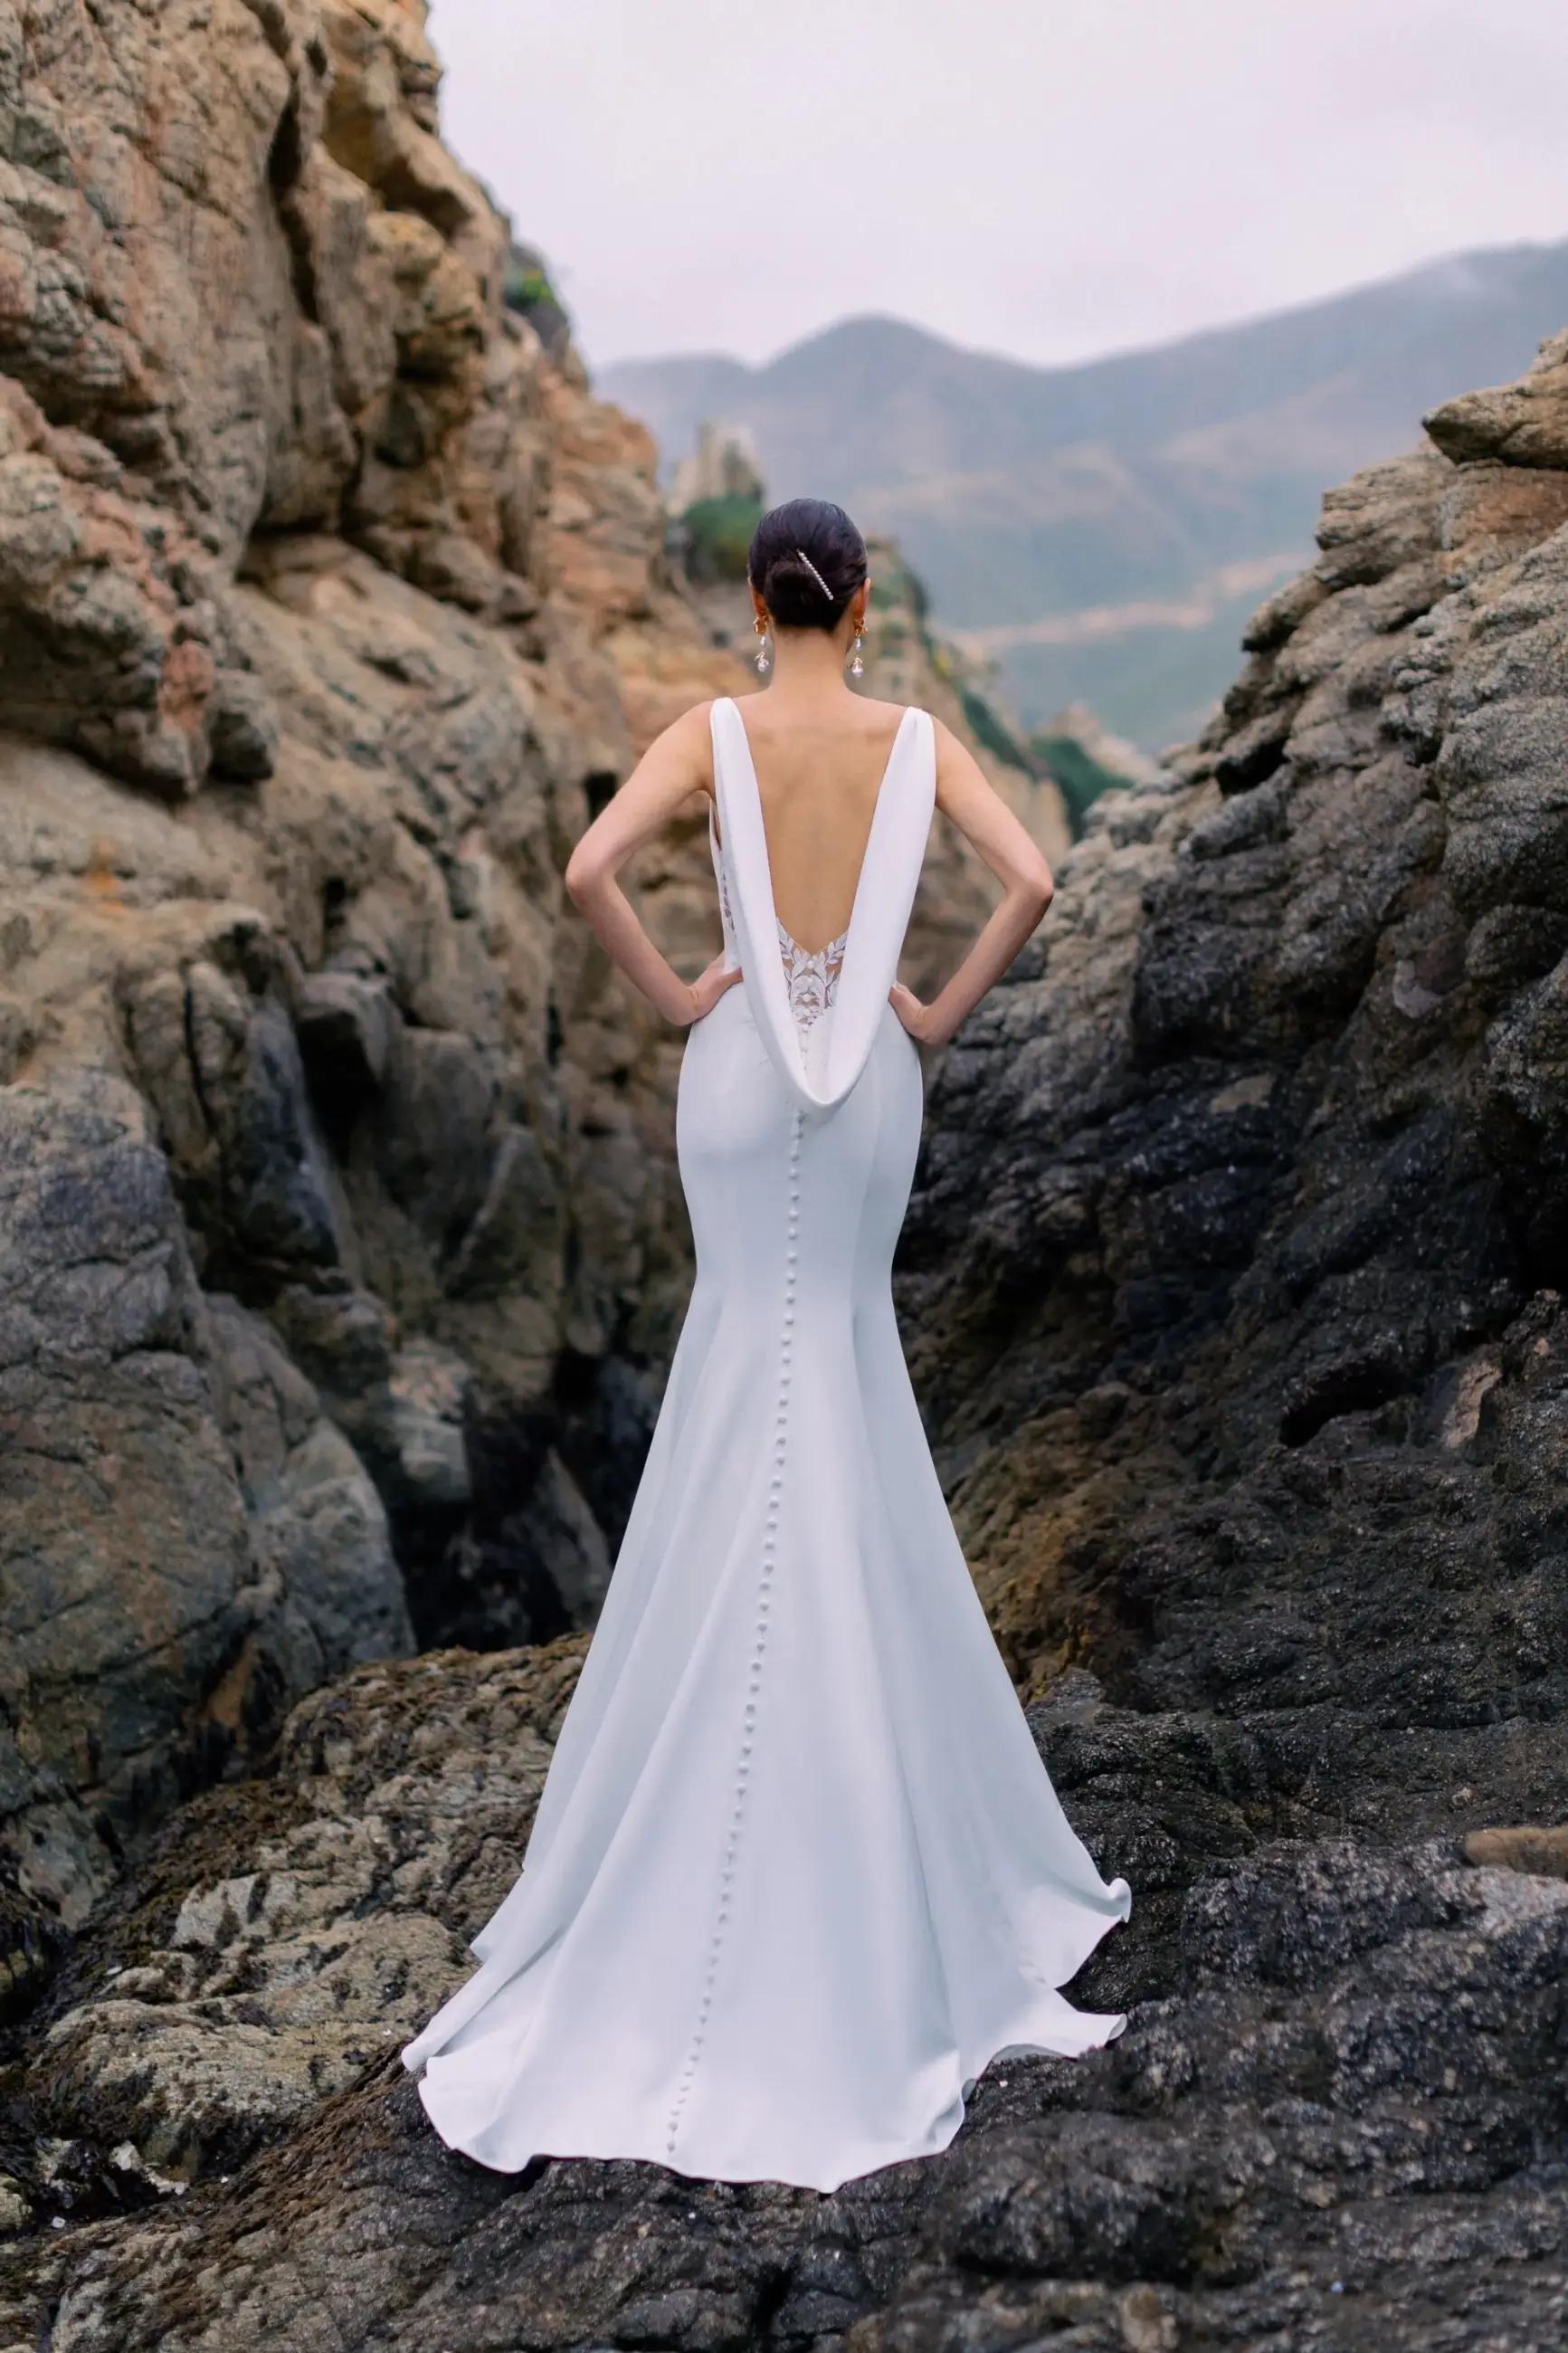 Minimalist Magic: Simple and Chic Wedding Dresses You’ll Love Image